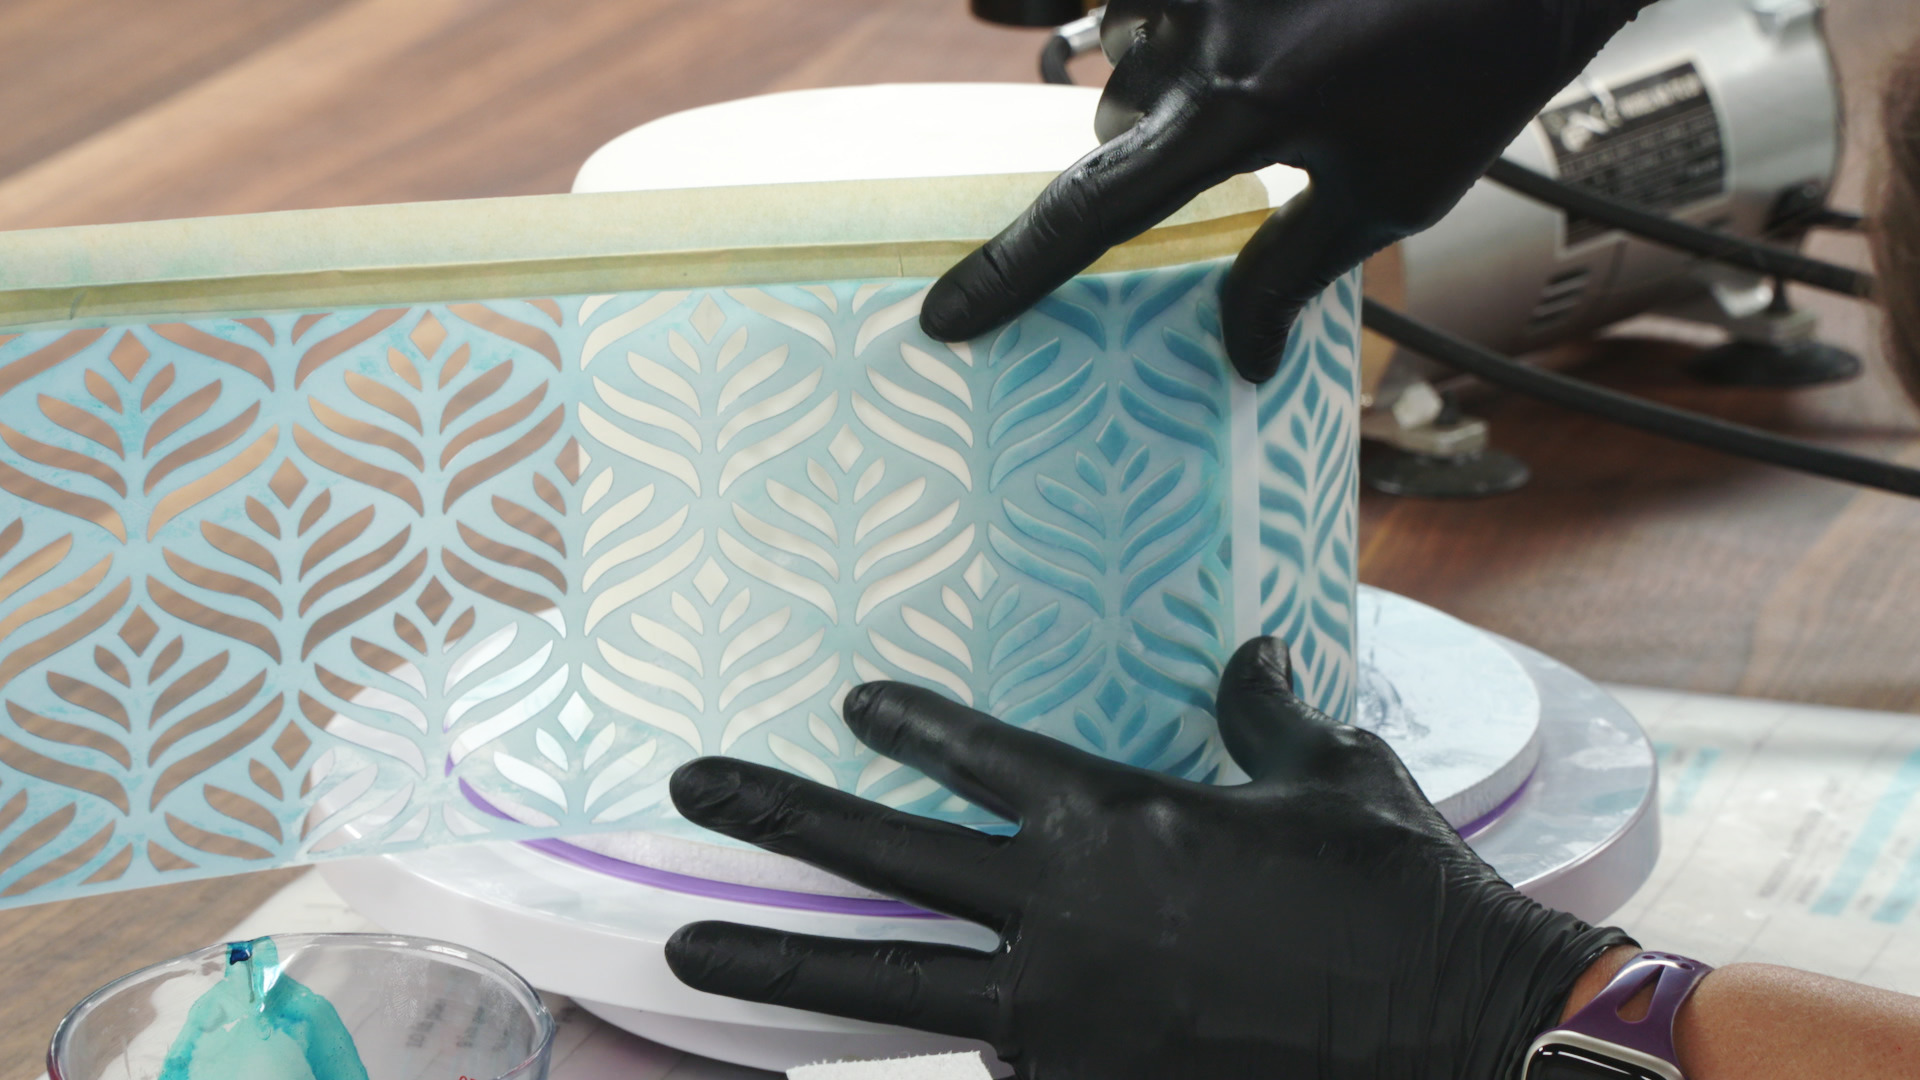 Airbrush Cake Stenciling Tips & Techniques